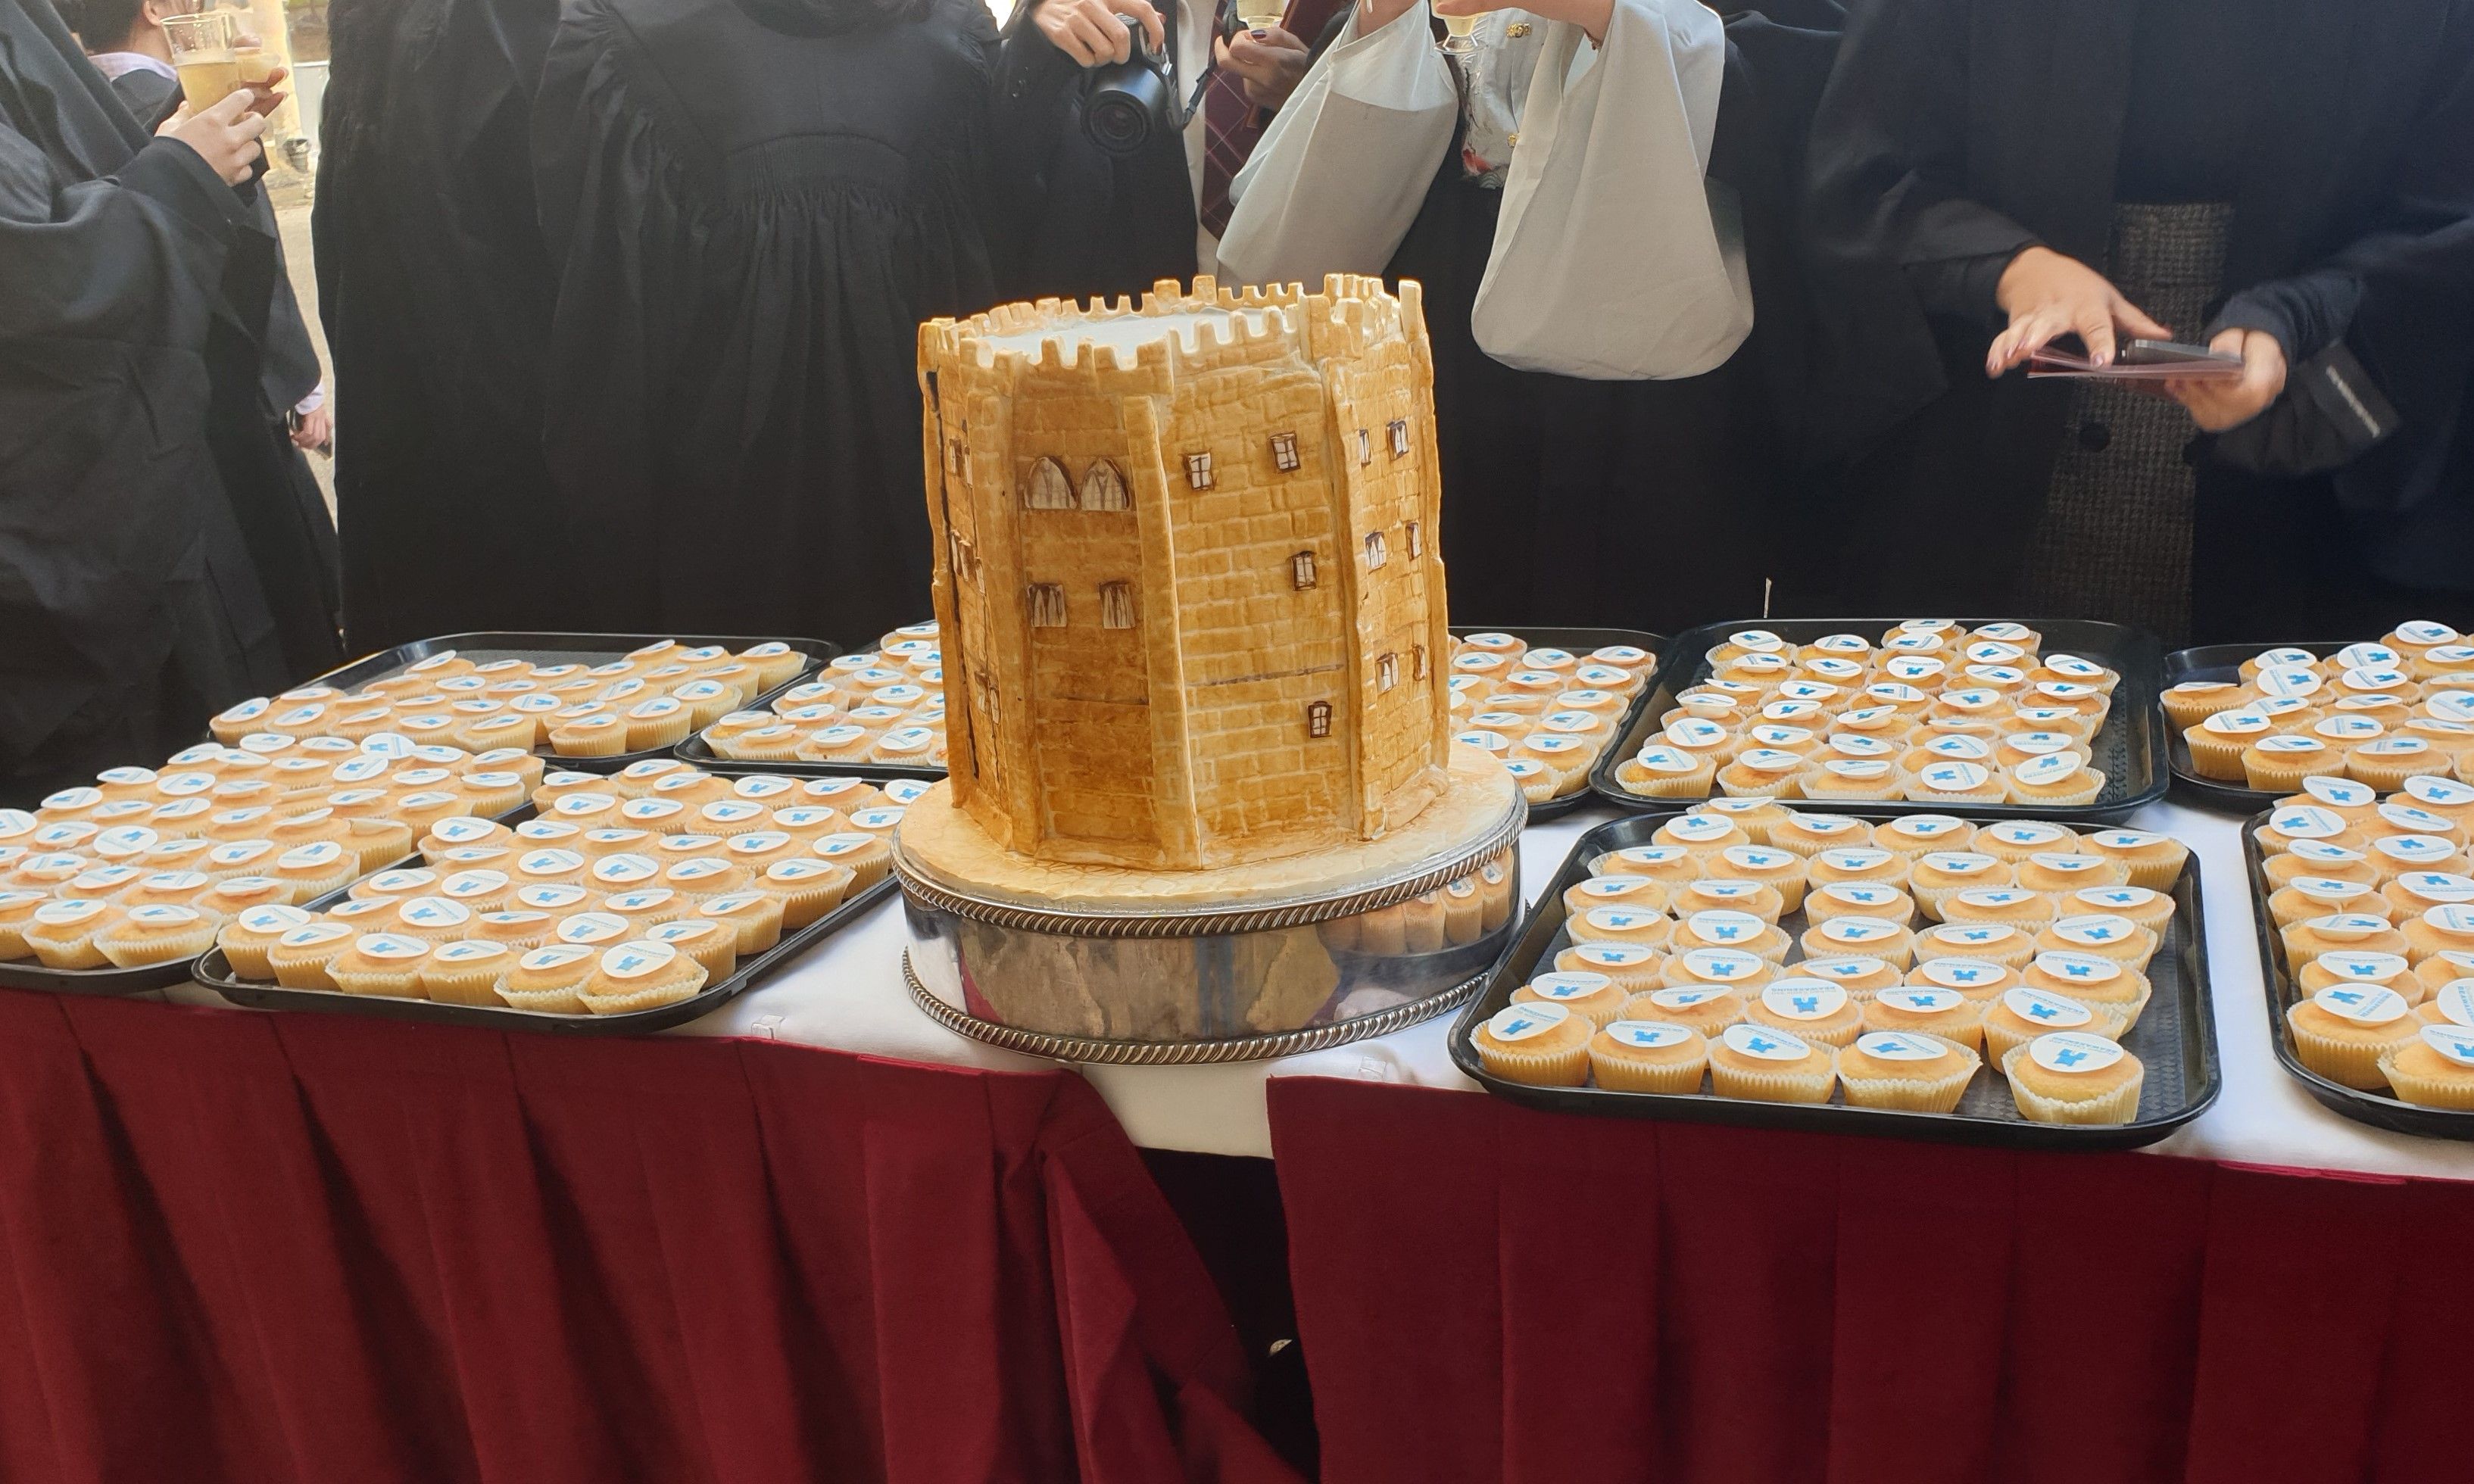 University College celebrating with Castle-themed cake during Matriculation 2022